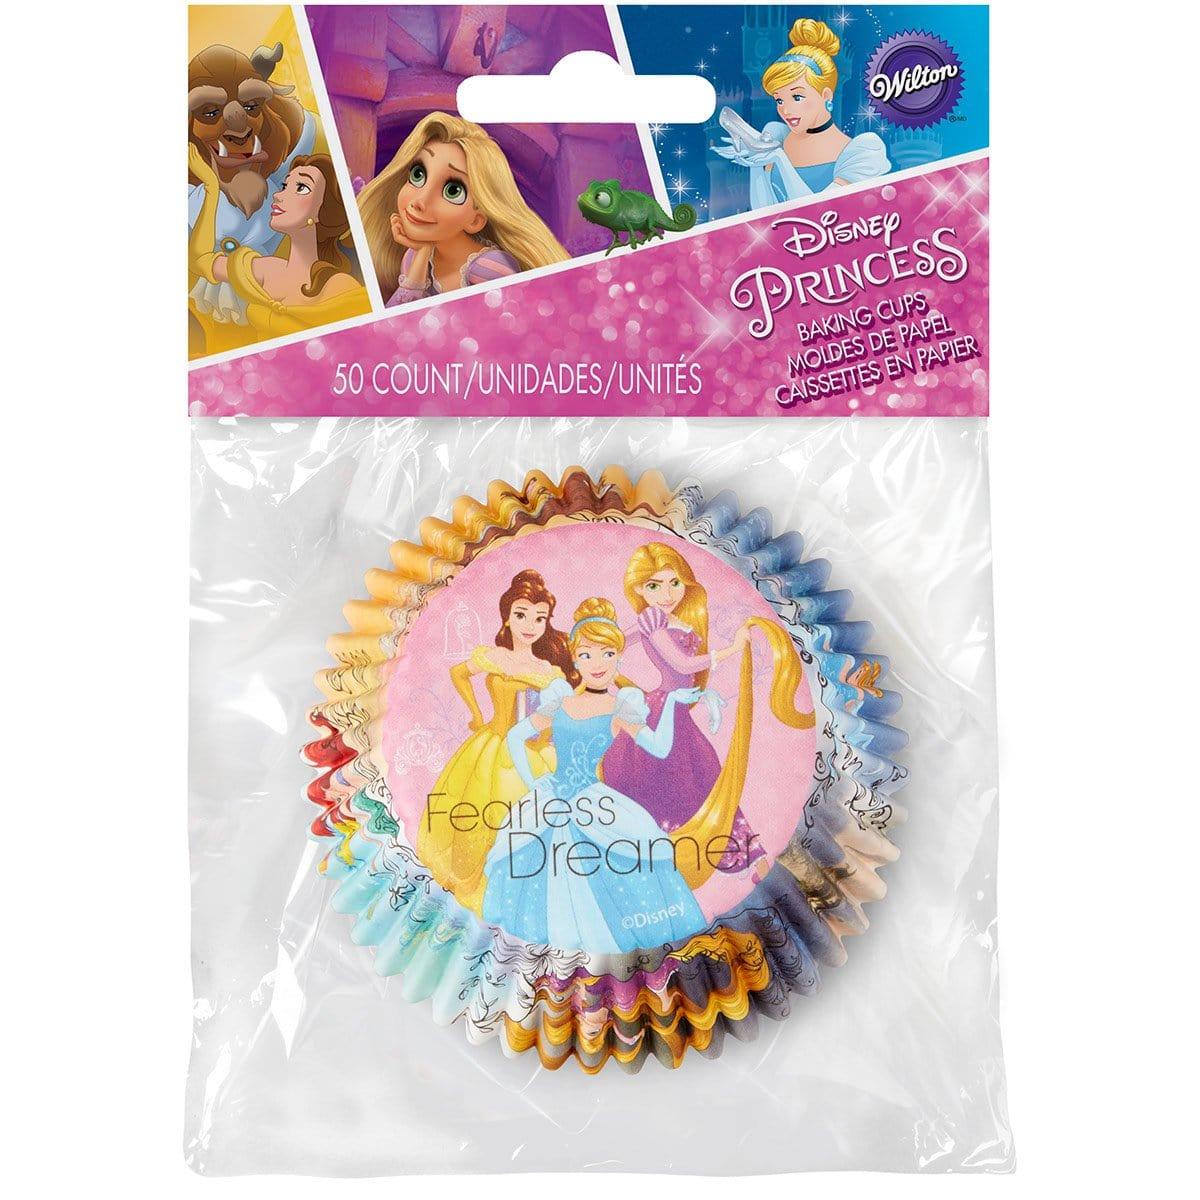 Buy Kids Birthday Disney Princesses baking cups, 50 per package sold at Party Expert